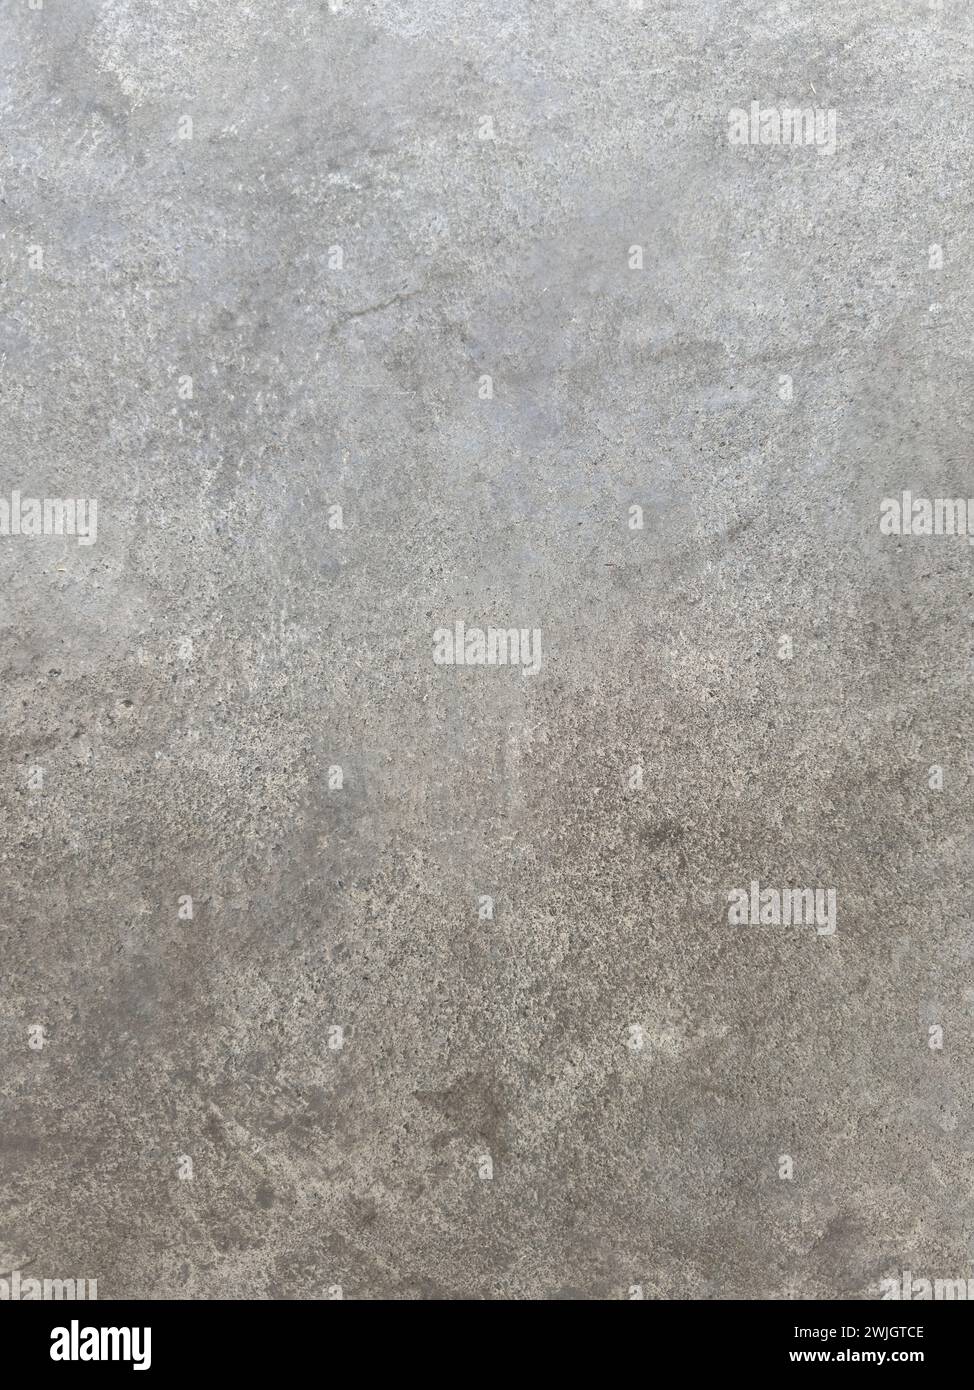 Grungy gray color floor concrete texture background close up view Stock Photo